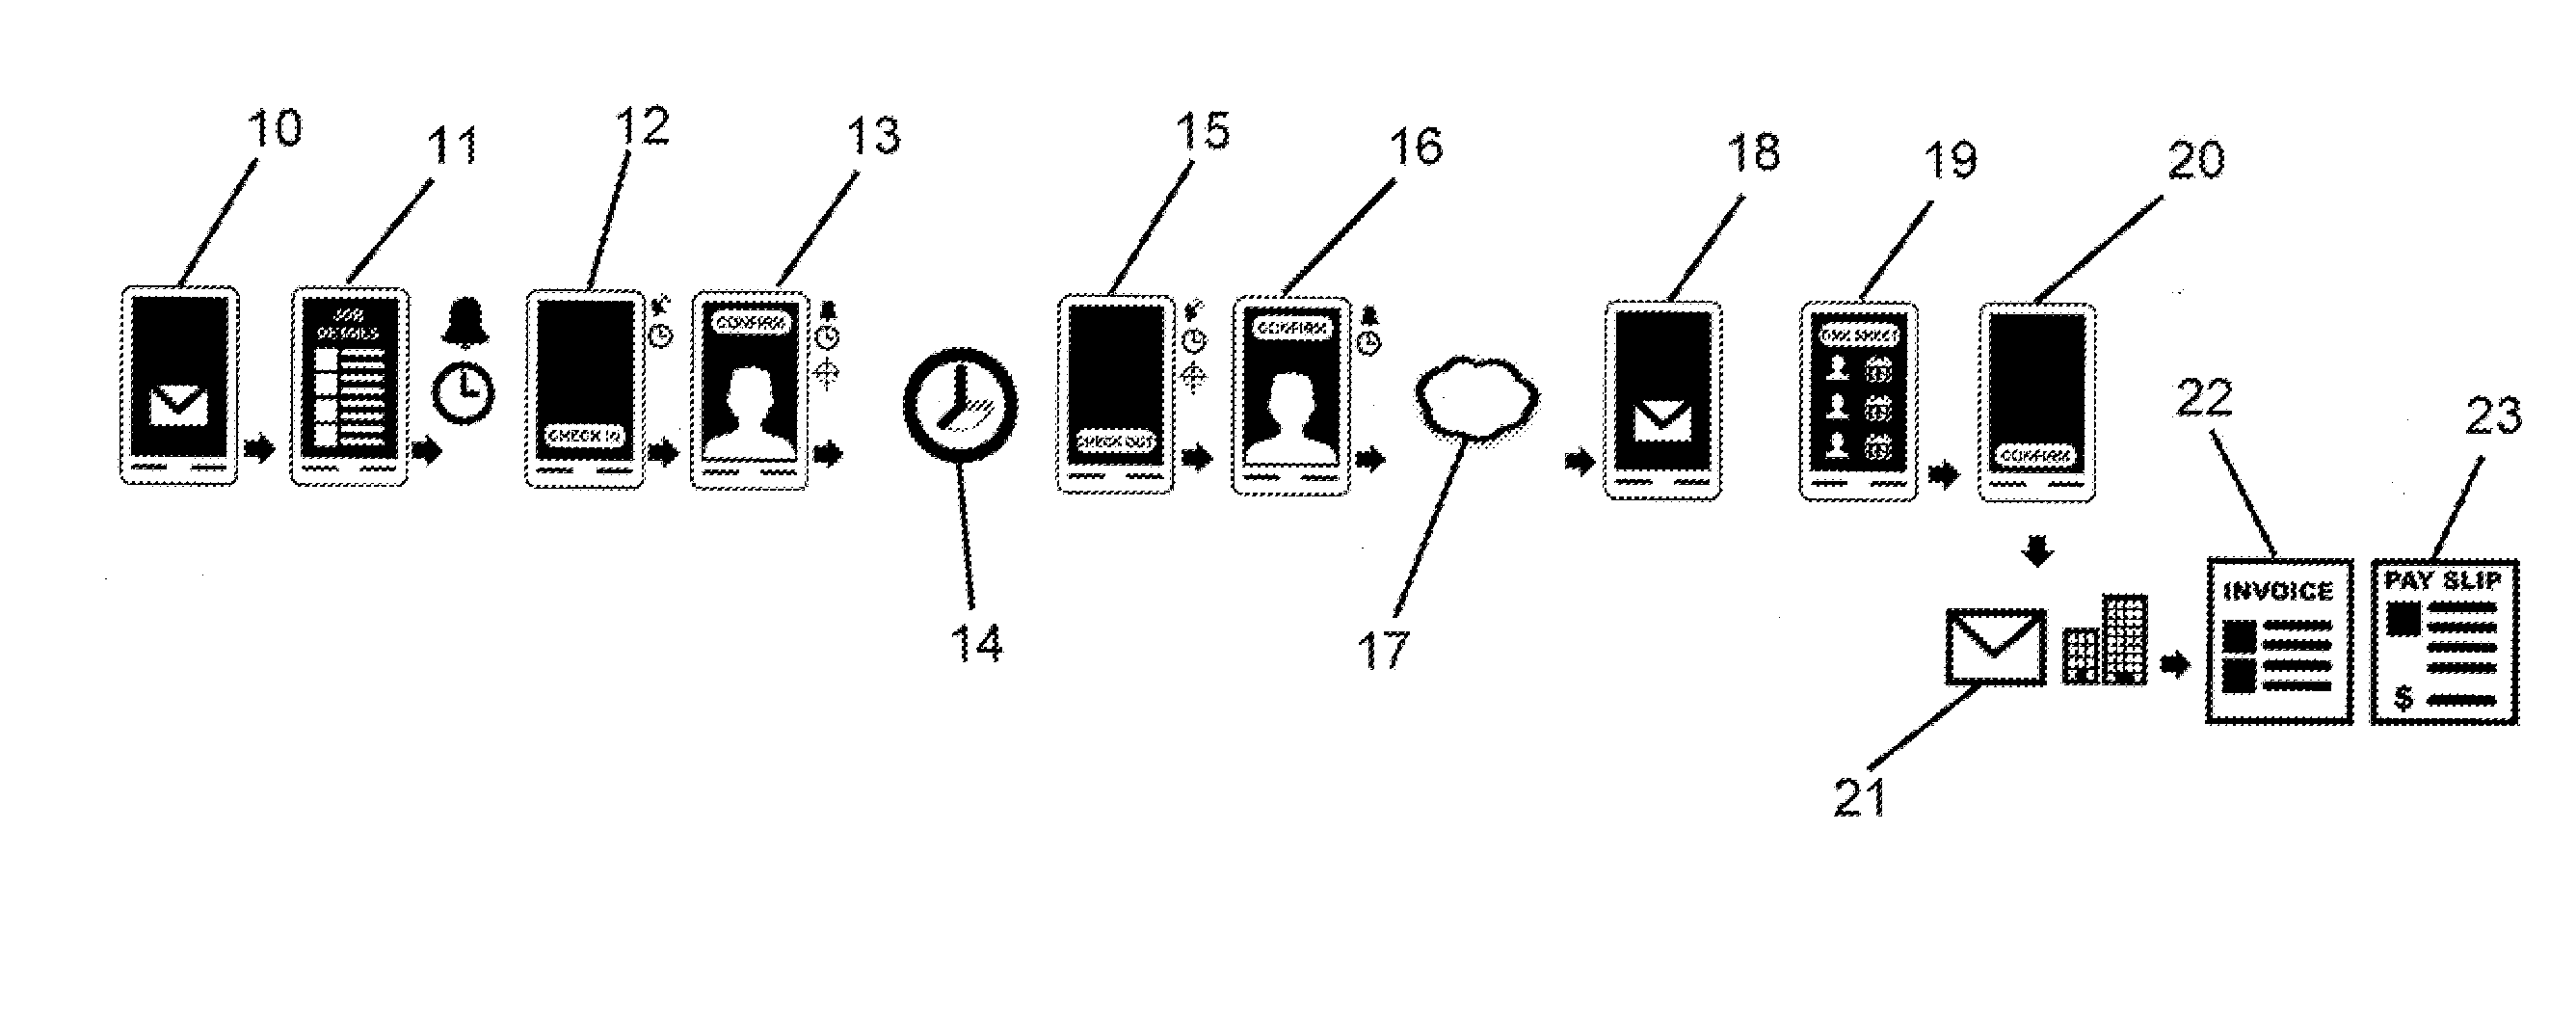 Method and apparatus for verifying third party employee time and attendence